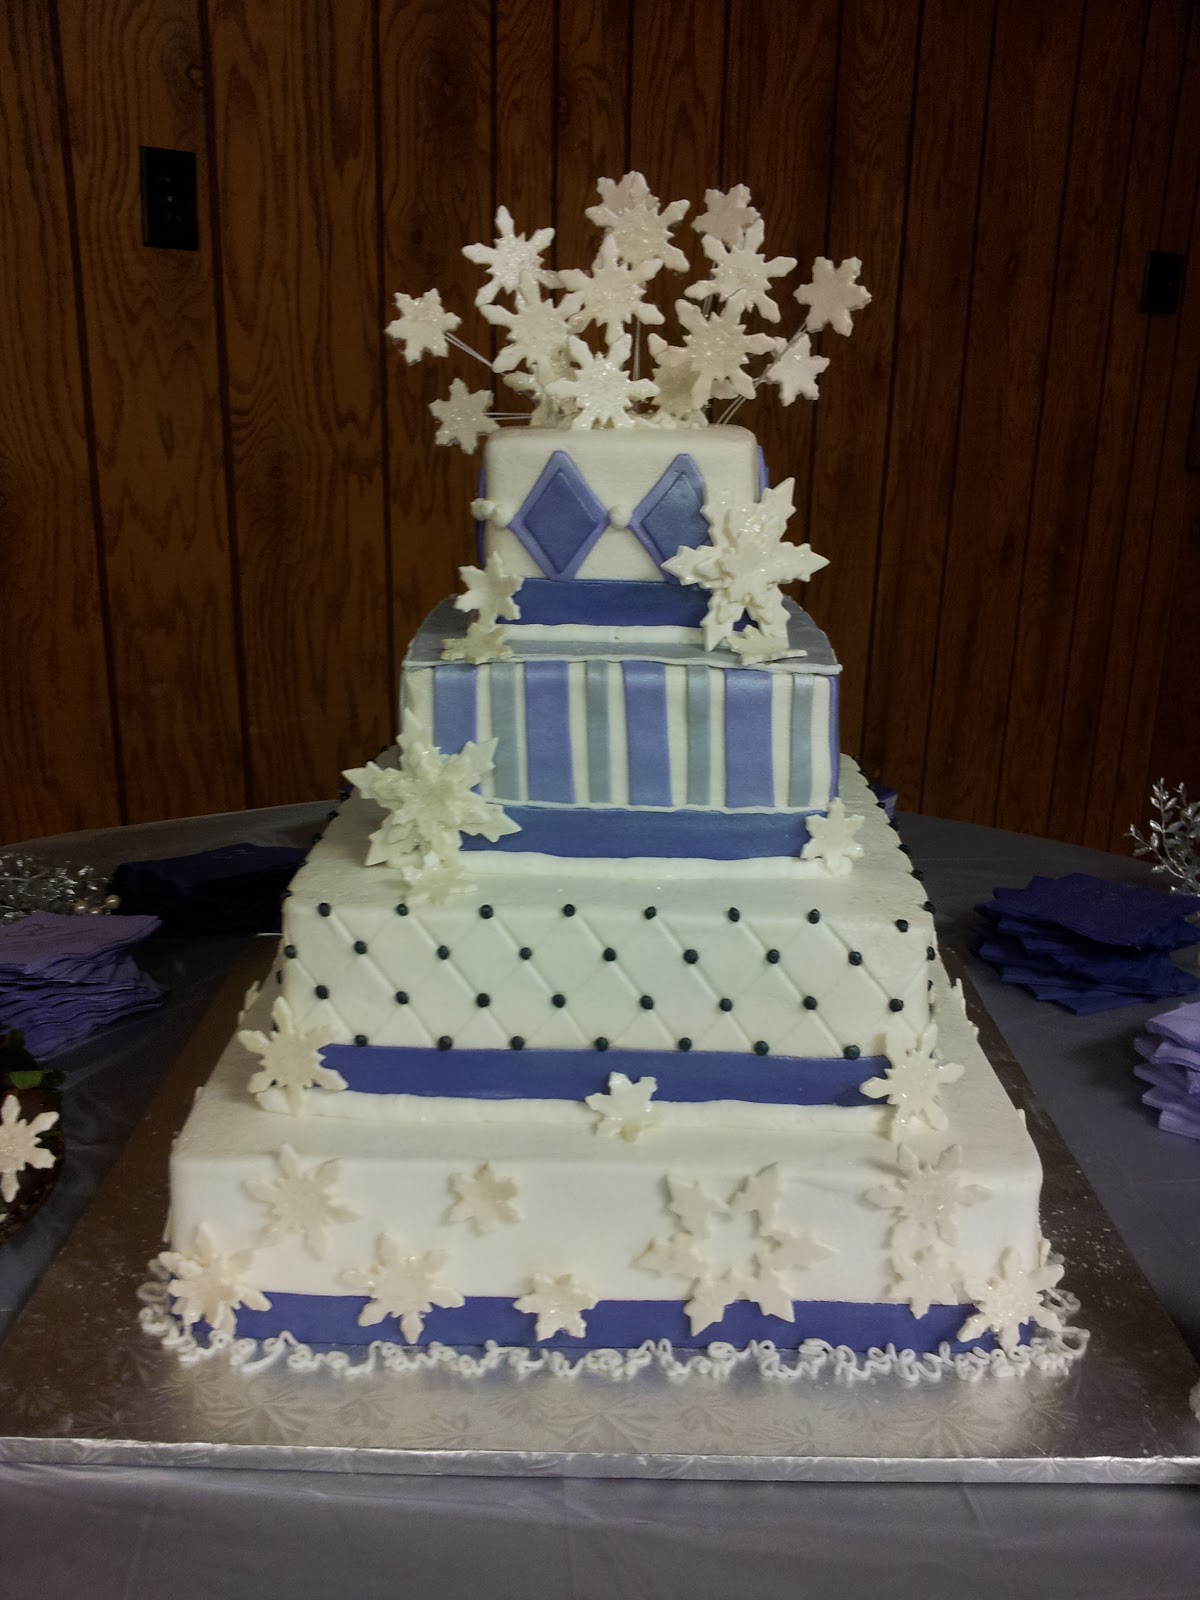 silver wedding cake stands , white and silver wedding cake with fondant snowflakes. This cake 